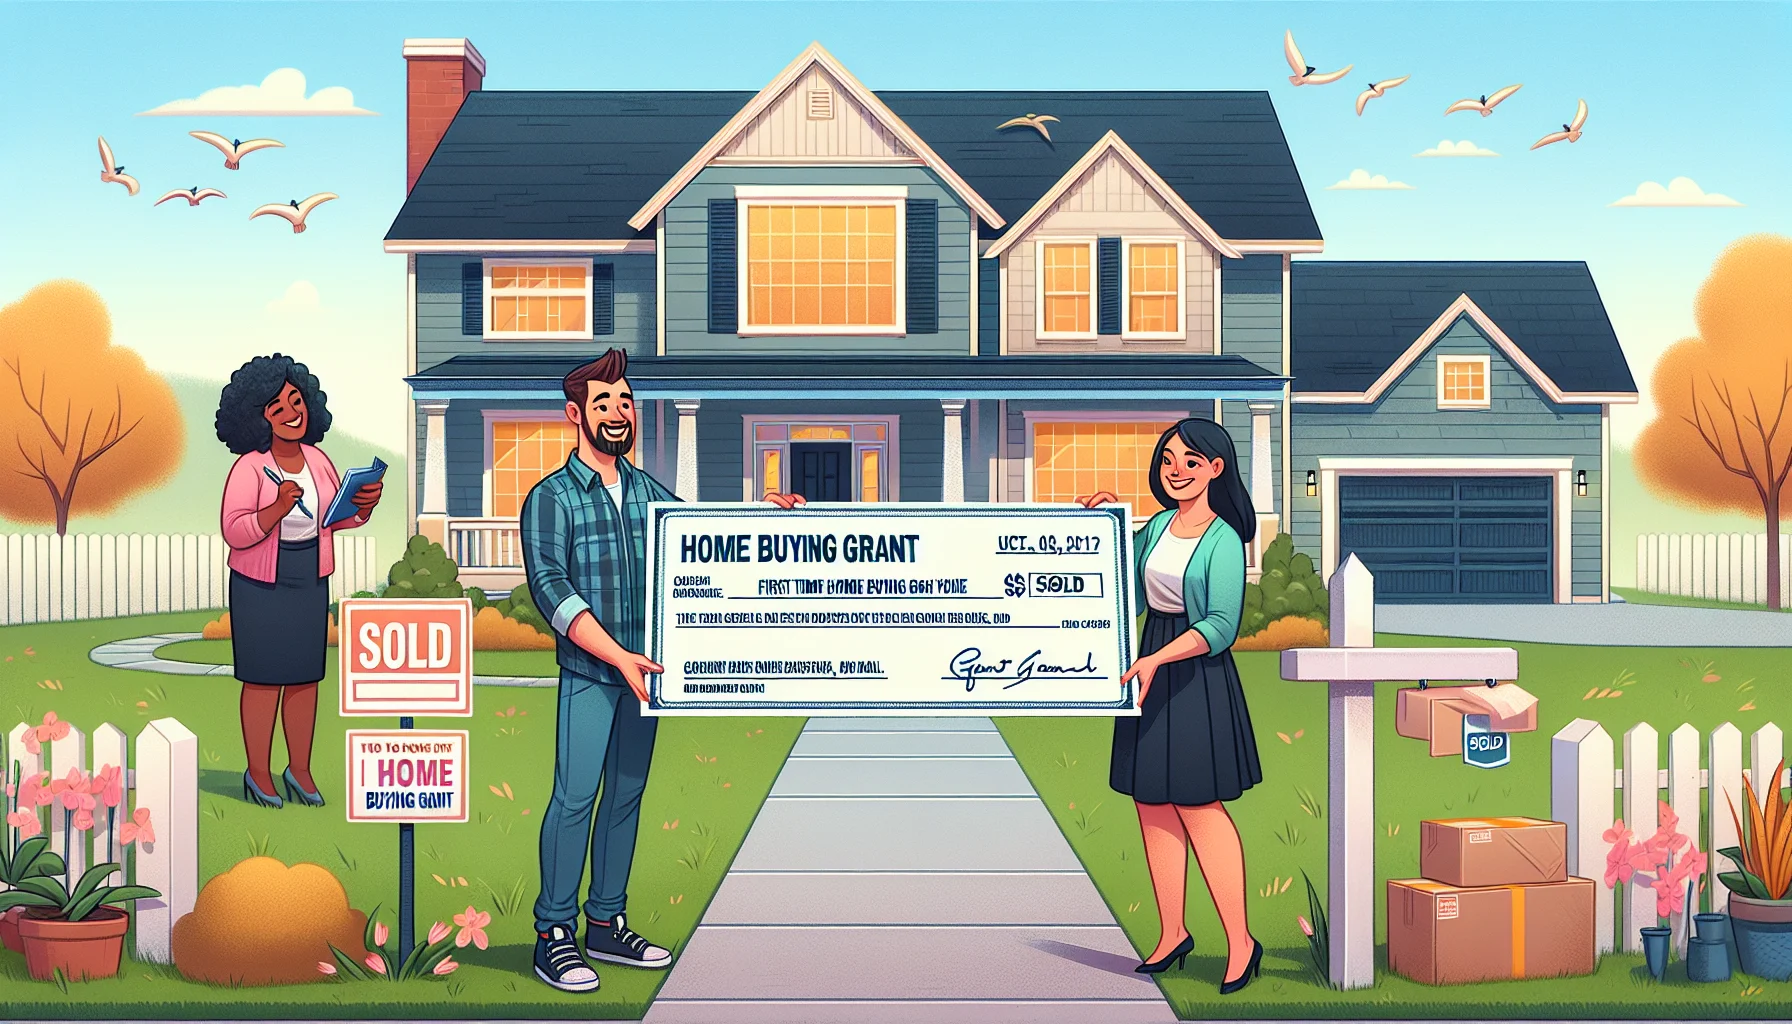 Create a whimsical and realistic image that embodies the perfect scenario for first-time home buying. Imagine a jubilant couple, a Caucasian woman and a South Asian man, holding a massive symbolic check that says 'Home Buying Grant'. They are standing in front of their new beautiful suburban house with a sold sign in the yard. A friendly real-estate agent, a Black woman, is handing them the keys. The sky is clear, birds are chirping and the sun is shining, symbolizing a bright future.